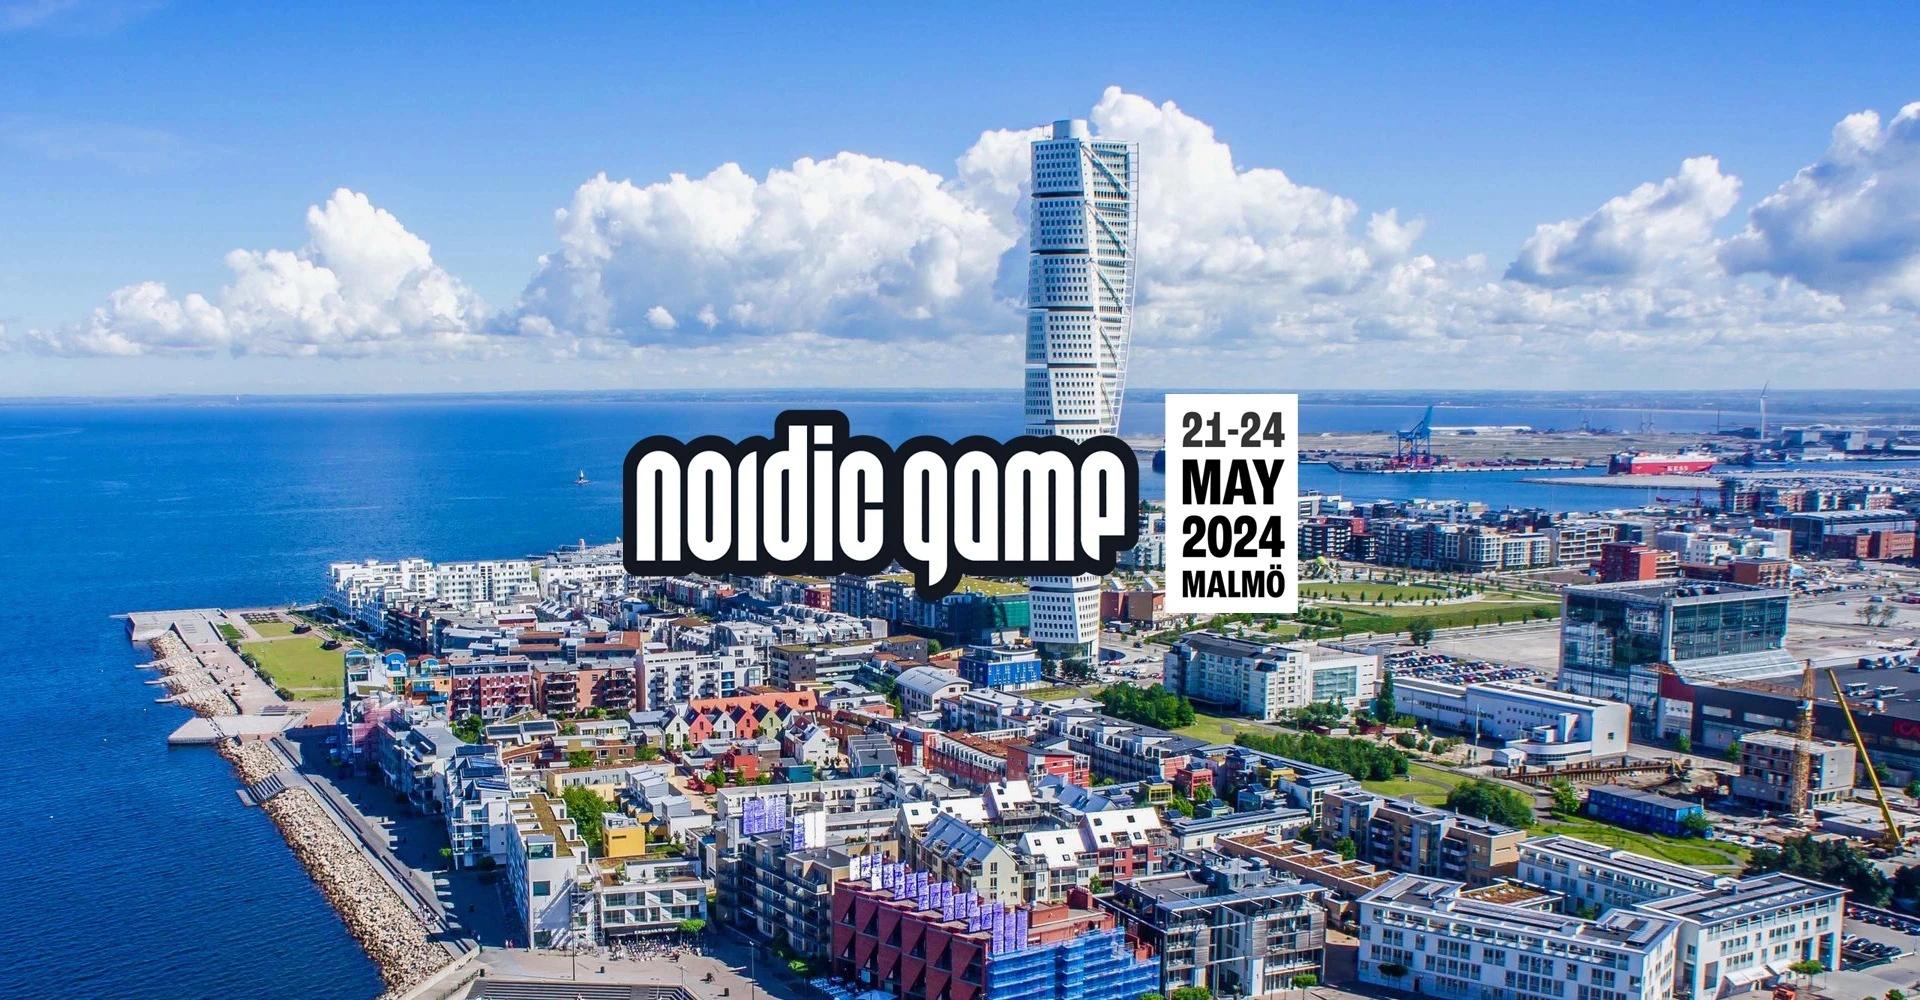 nordic game 2024 